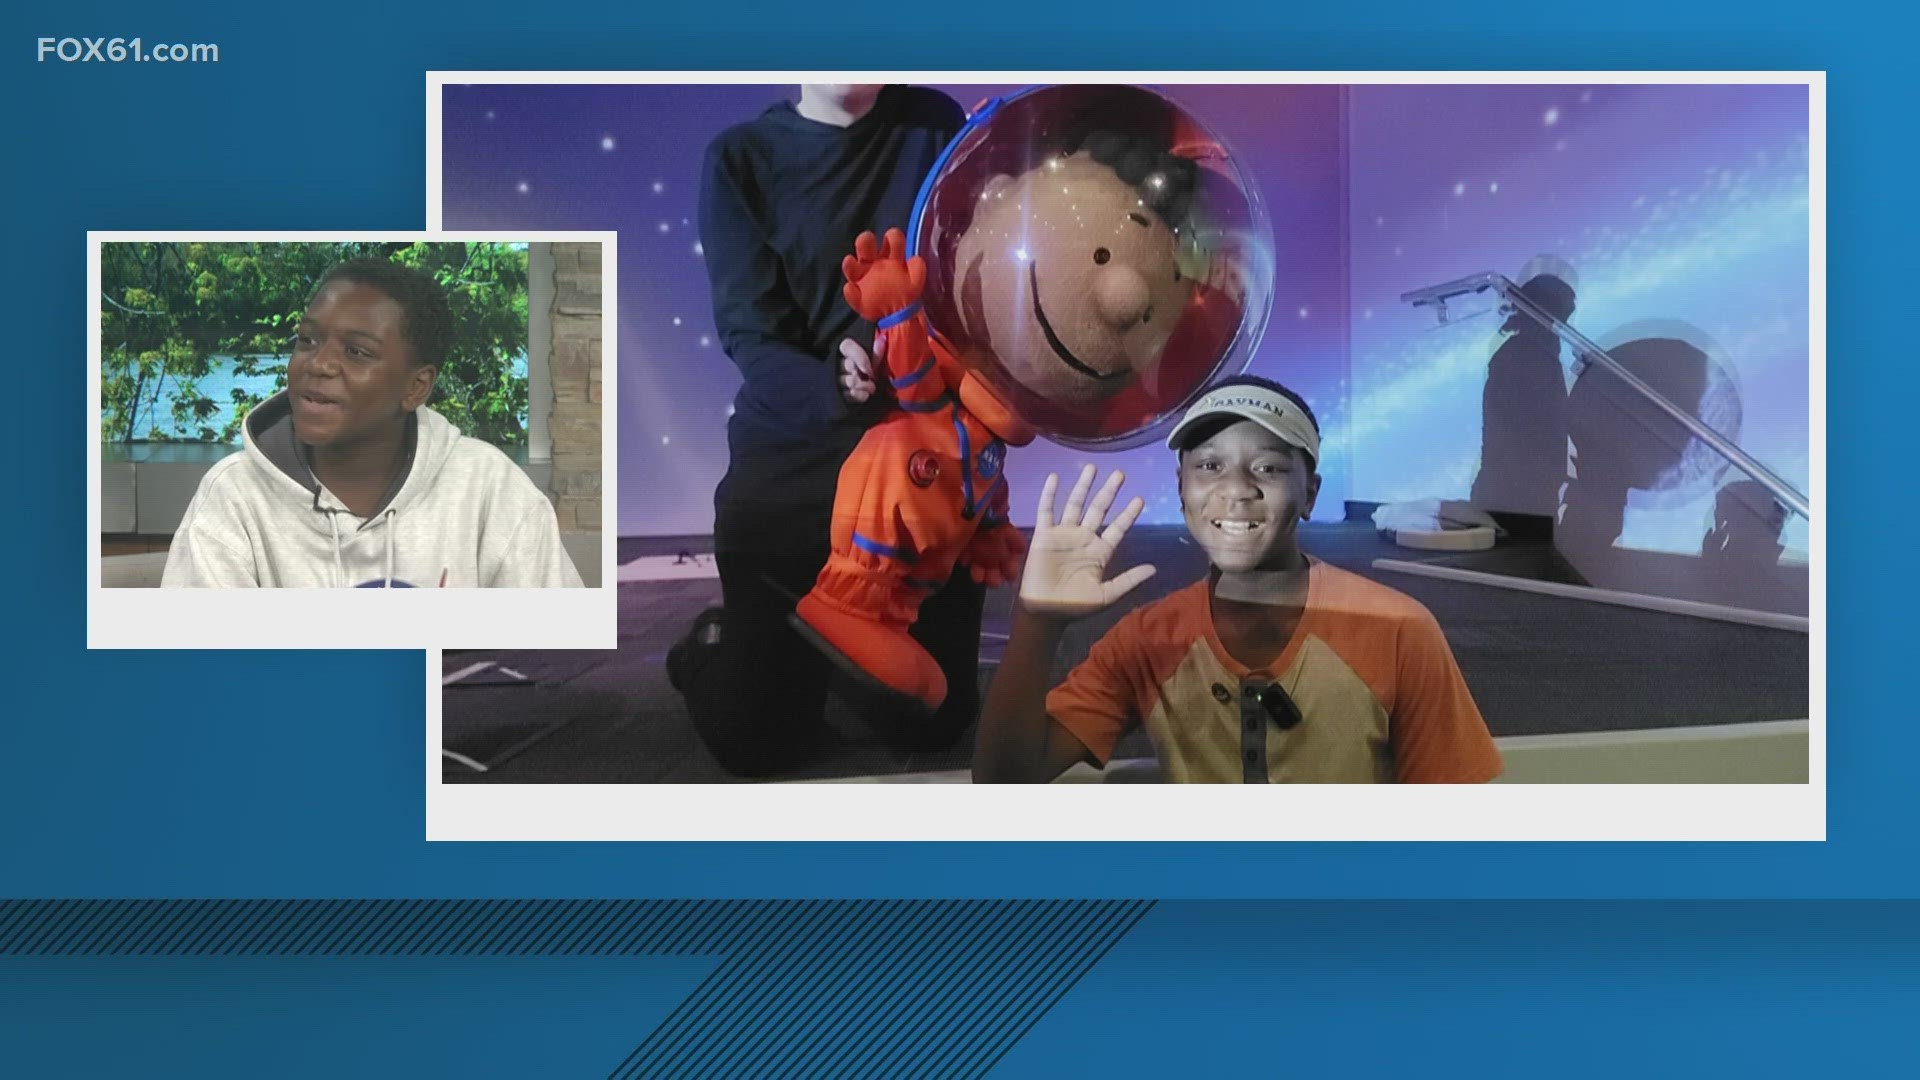 Corey Phaire of Danbury is the voice of PEANUTS' Franklin in the new show "All Systems are Go" at the Kennedy Space Center.